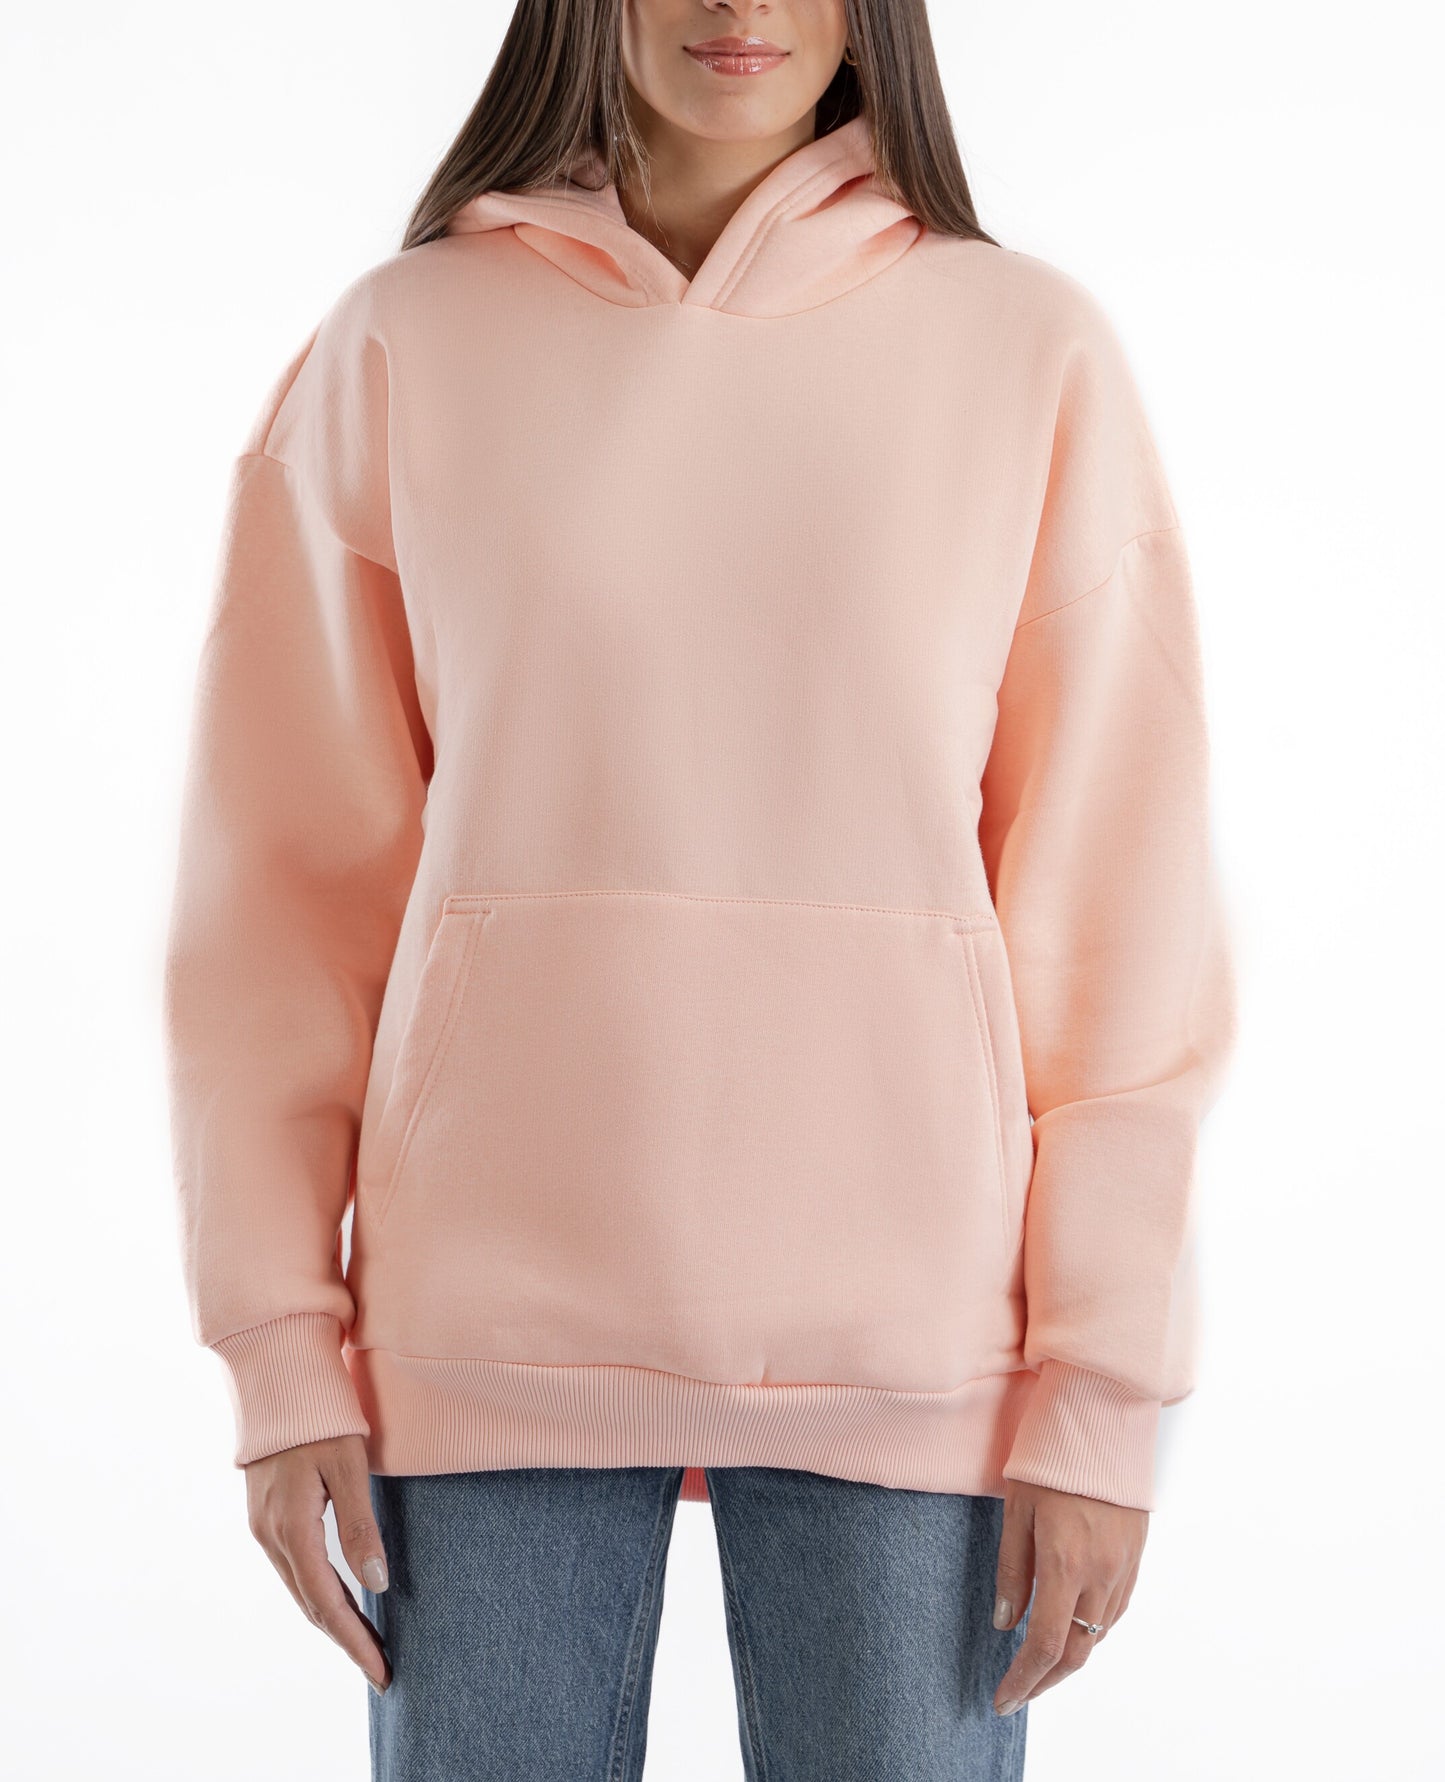 SIMON PINK OVER-SIZED HOODIE